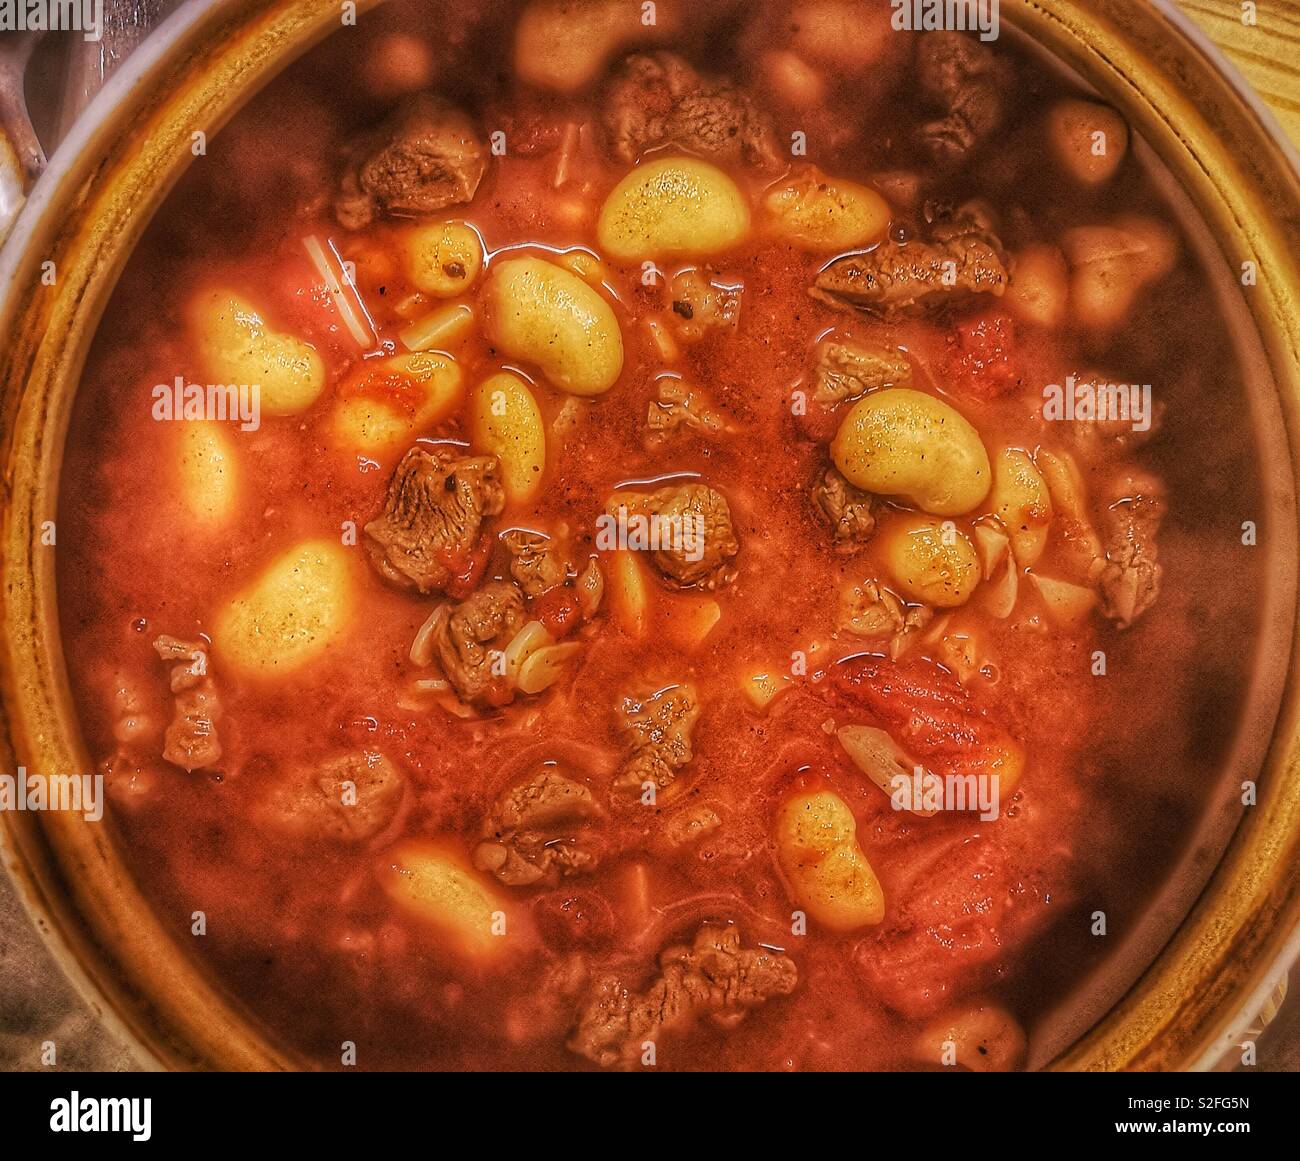 Lamb and butter bean stew, a real winter warmer Stock Photo